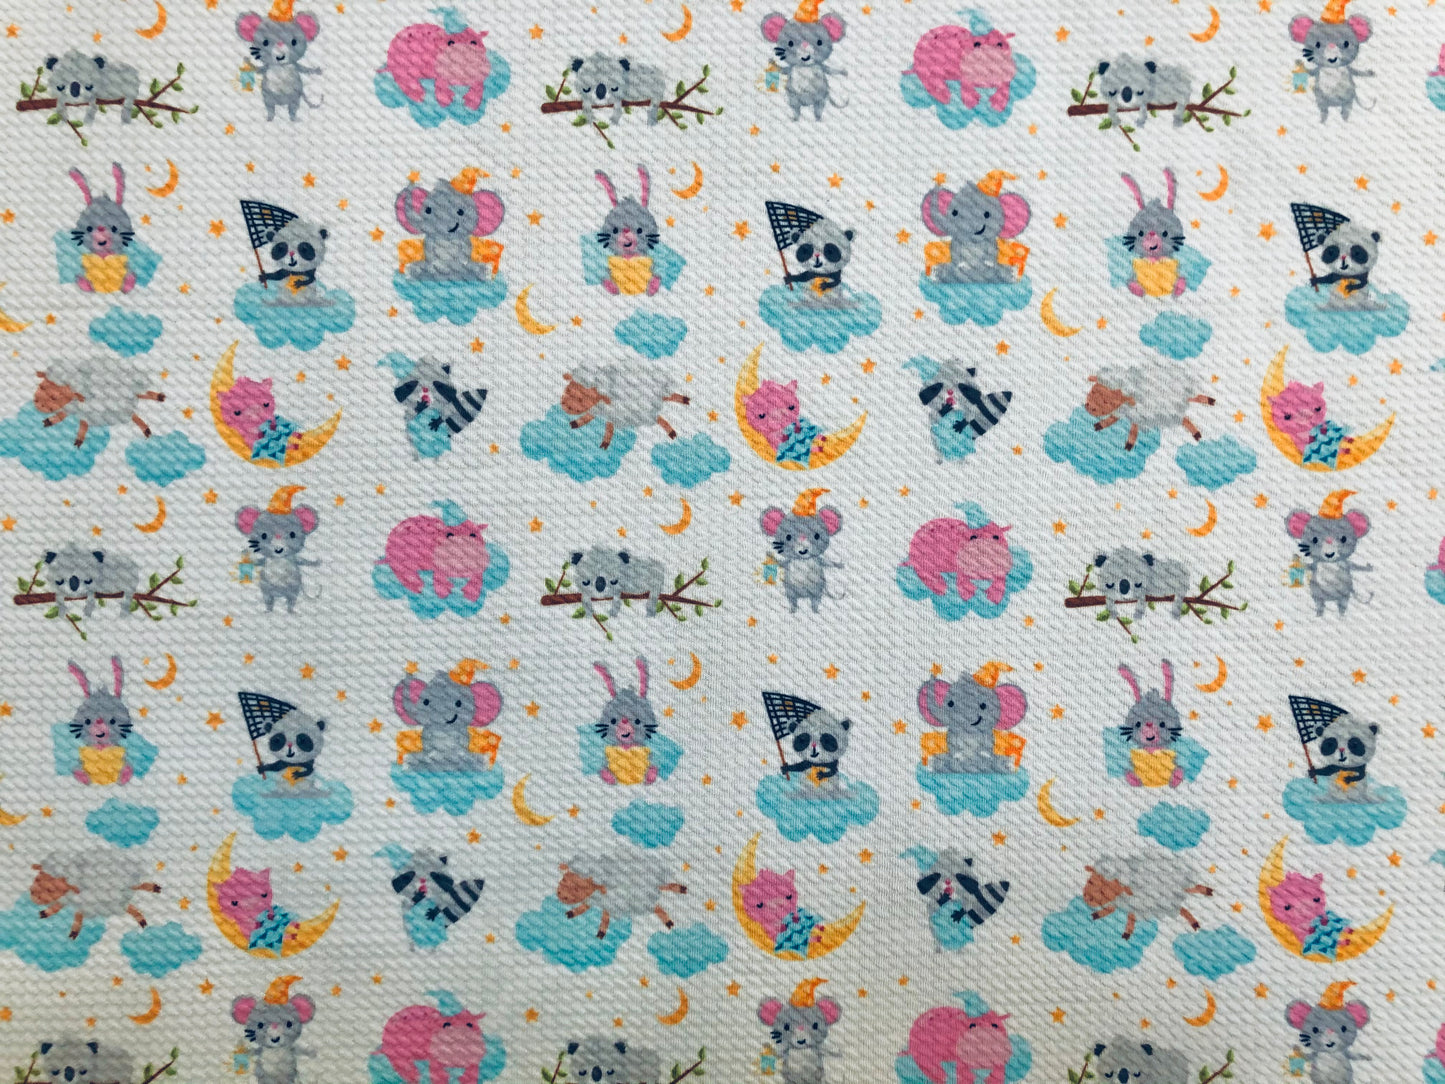 Bullet Knit Printed Fabric-Ivory Blue Clouds and Pandas-BPR206-Sold by the Yard-Bulk Available